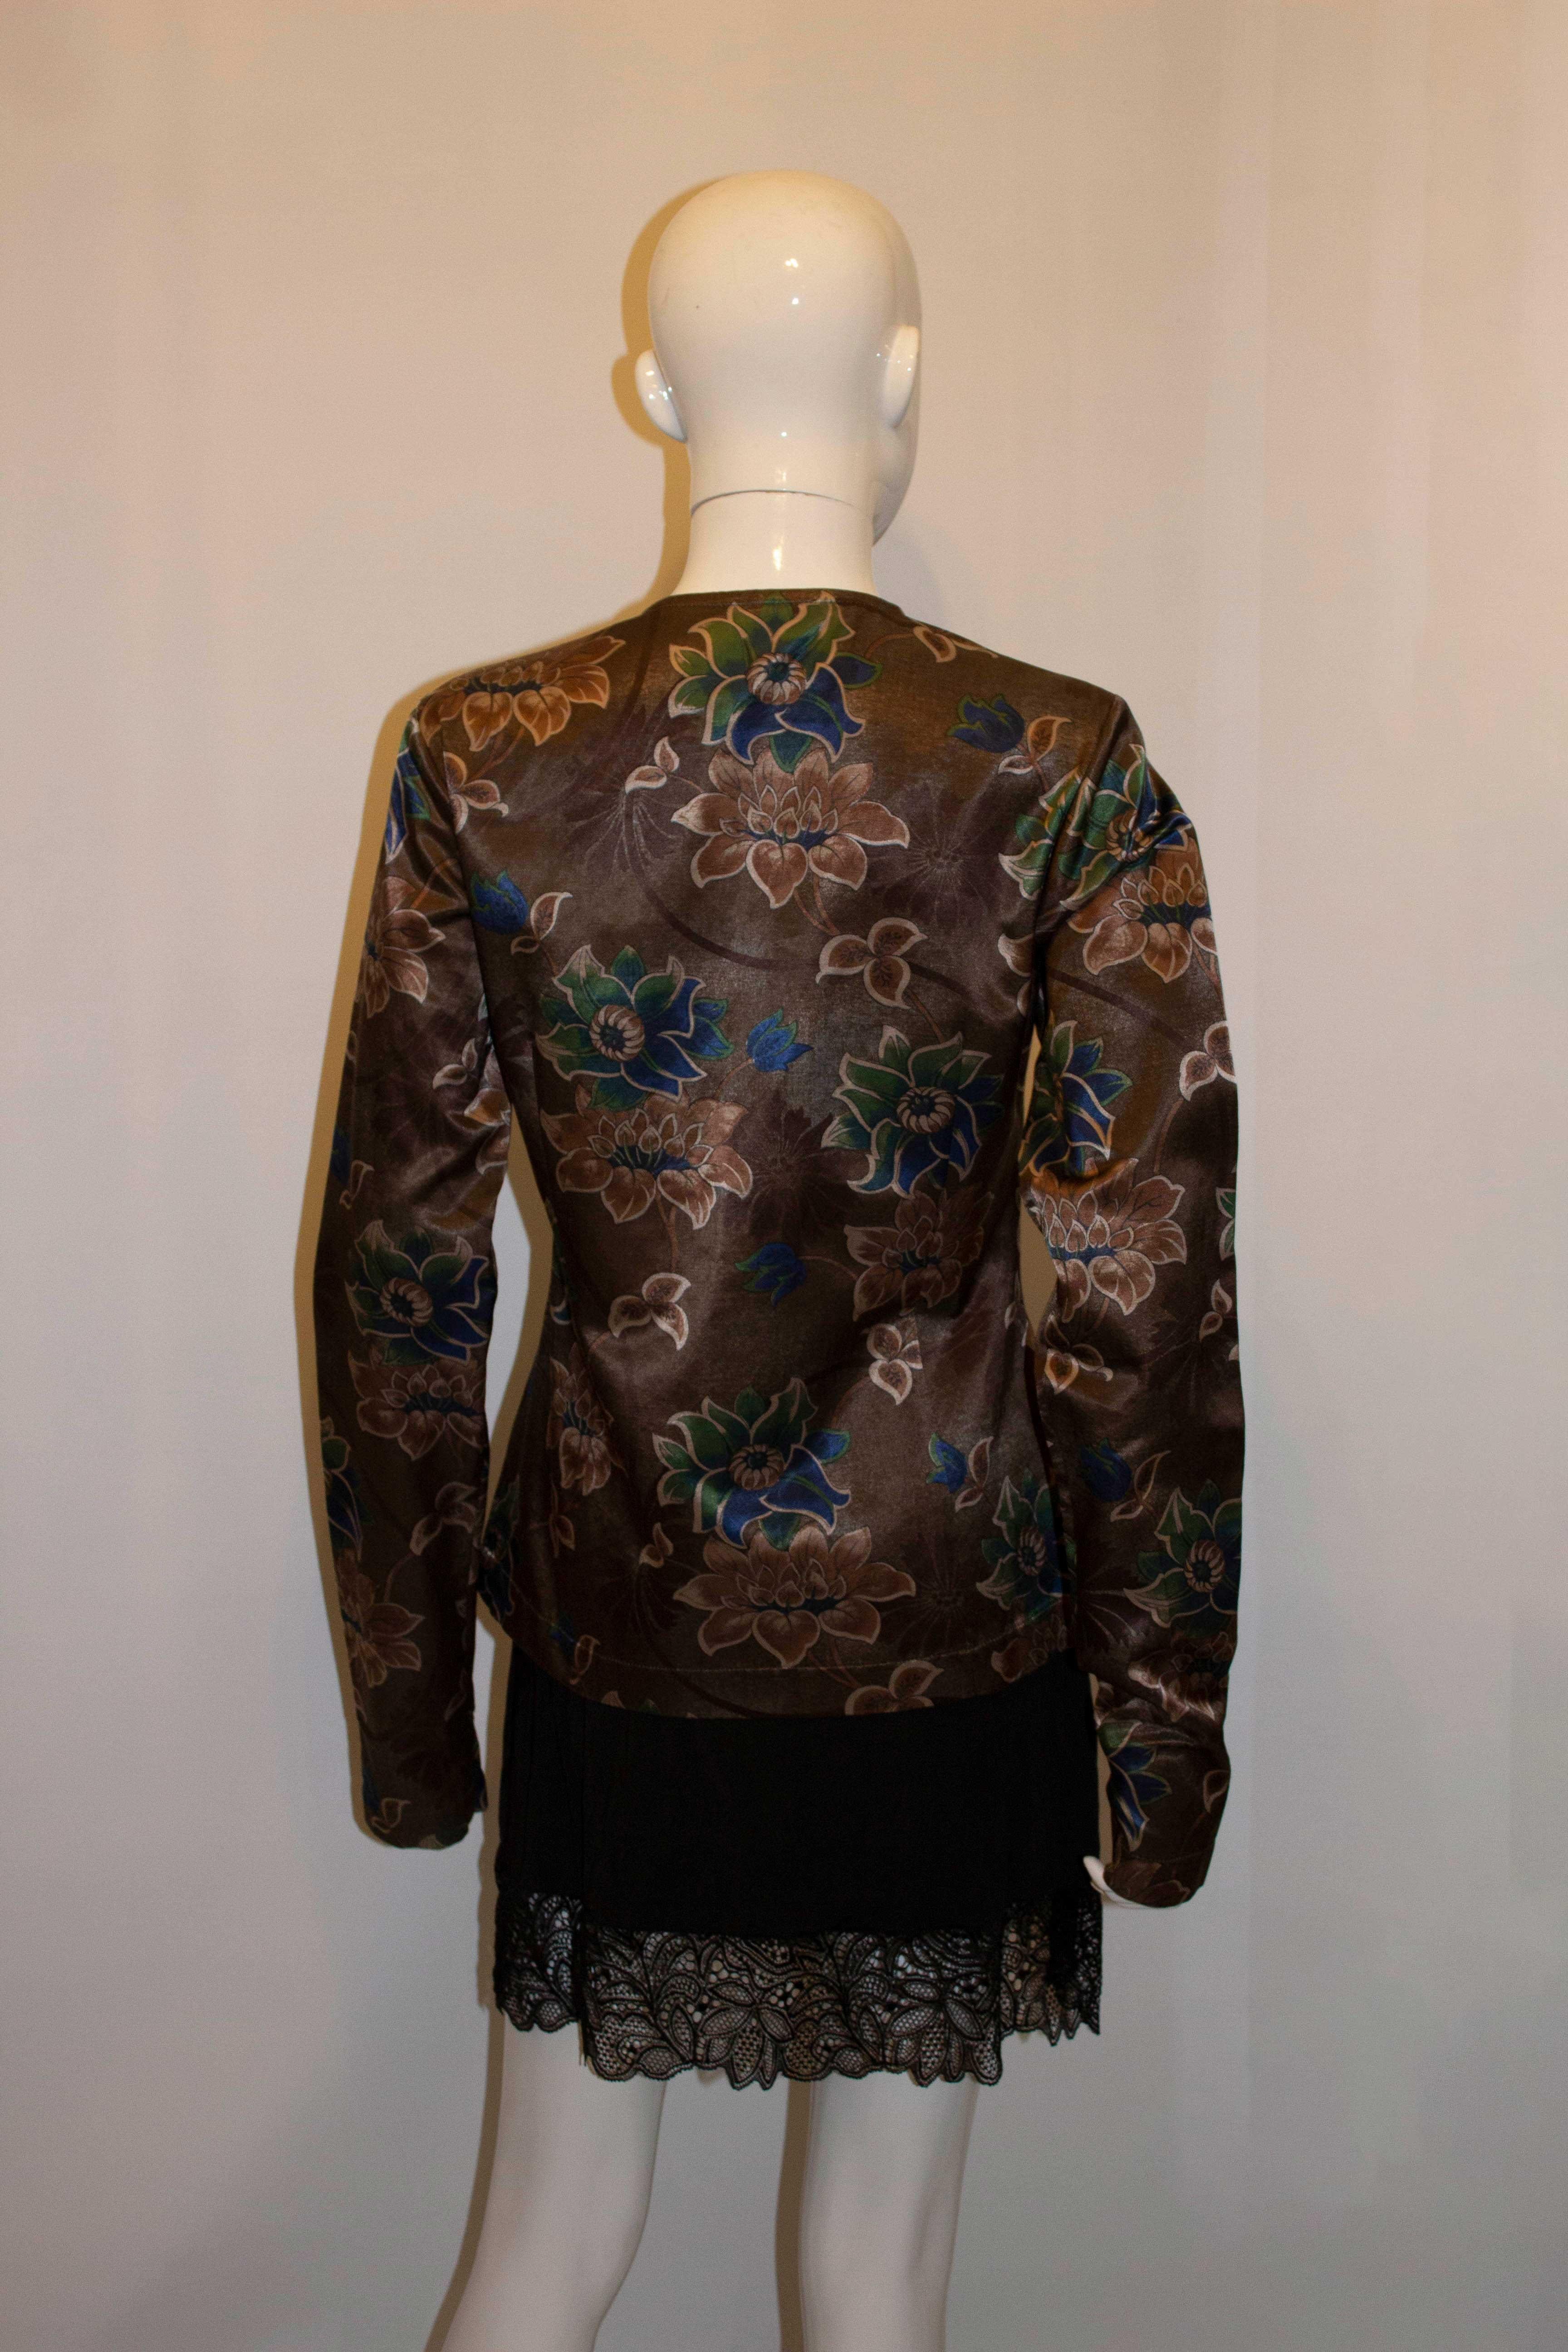 A pretty jacket / top by Dres van Noten. The jacket has an olive background , with a floral print. It has a round neck with a hook and eye fastening. Made in Belgium, size 38. Measurements: Bust up to 38'', length 25''.